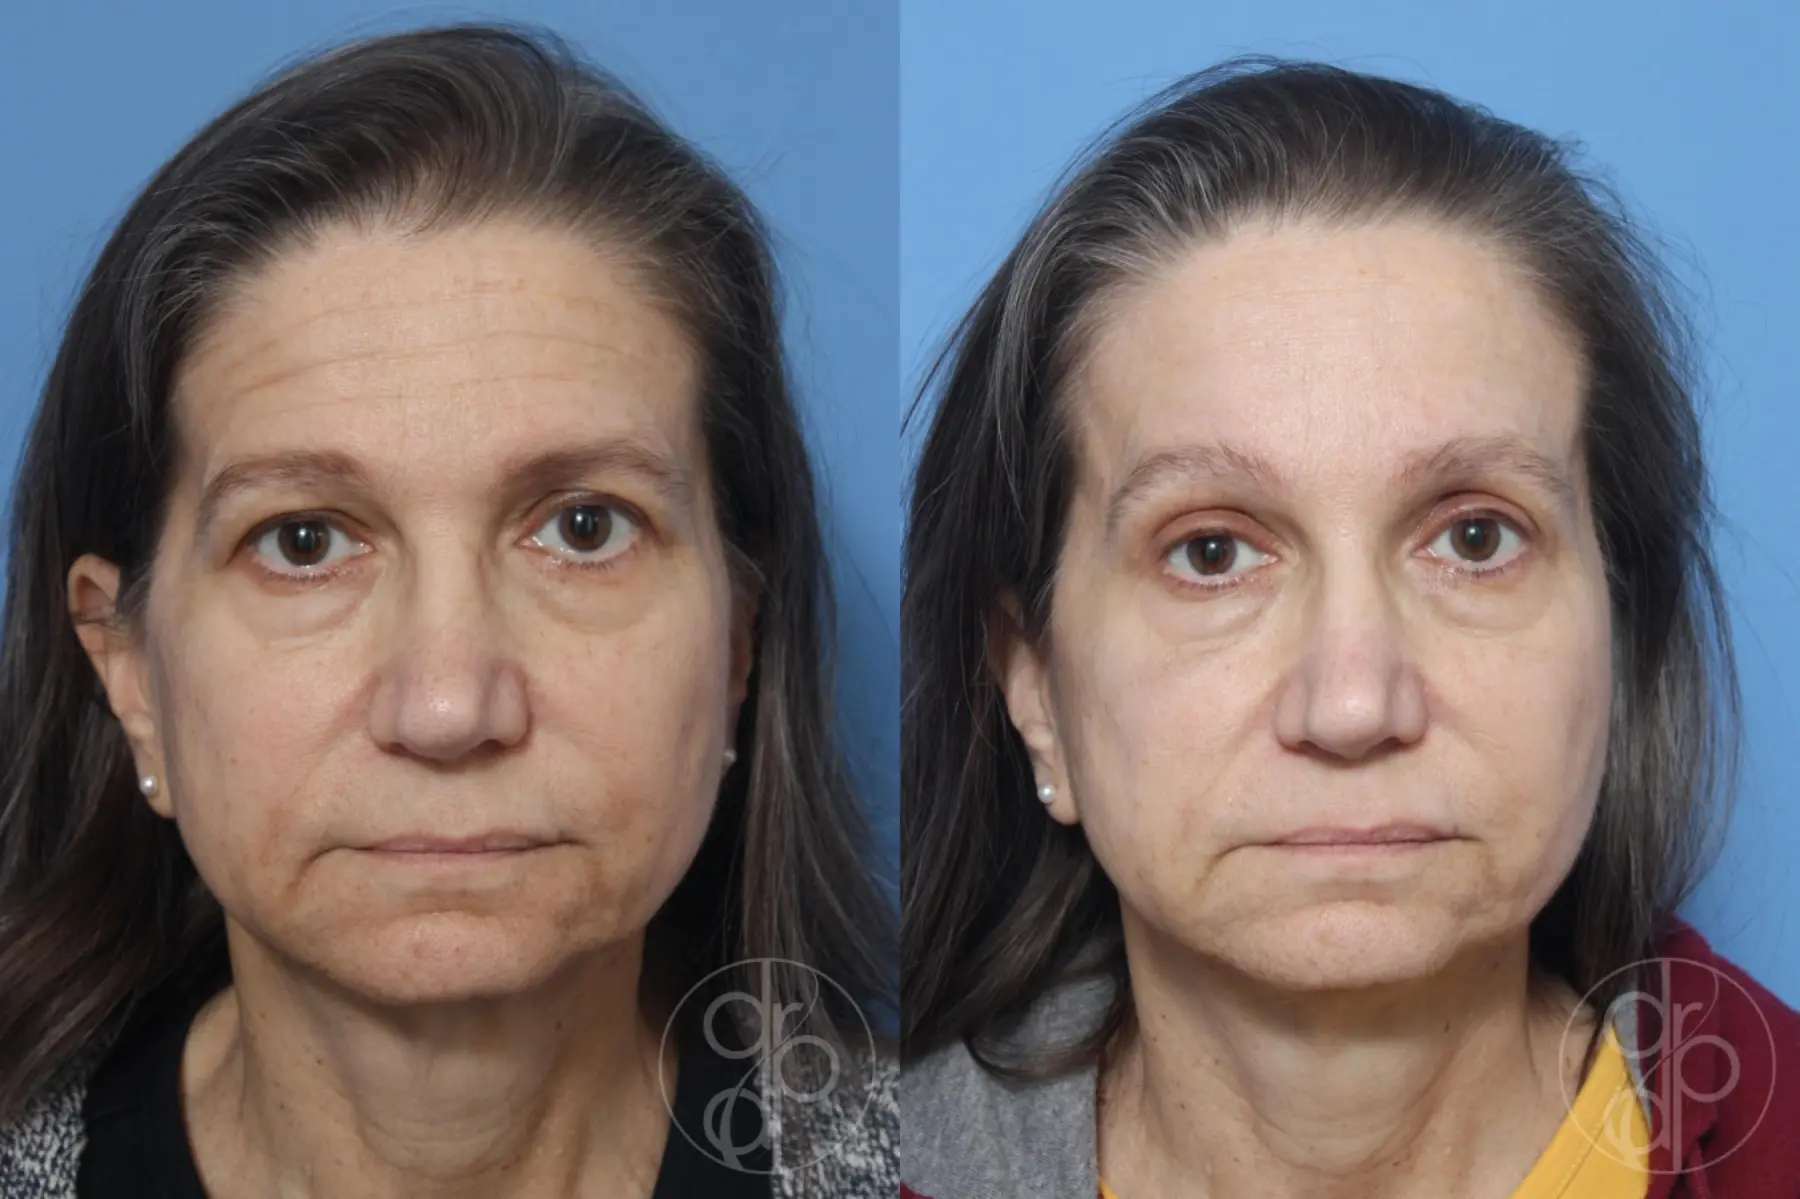 patient 12880 blepharoplasty before and after result - Before and After 1